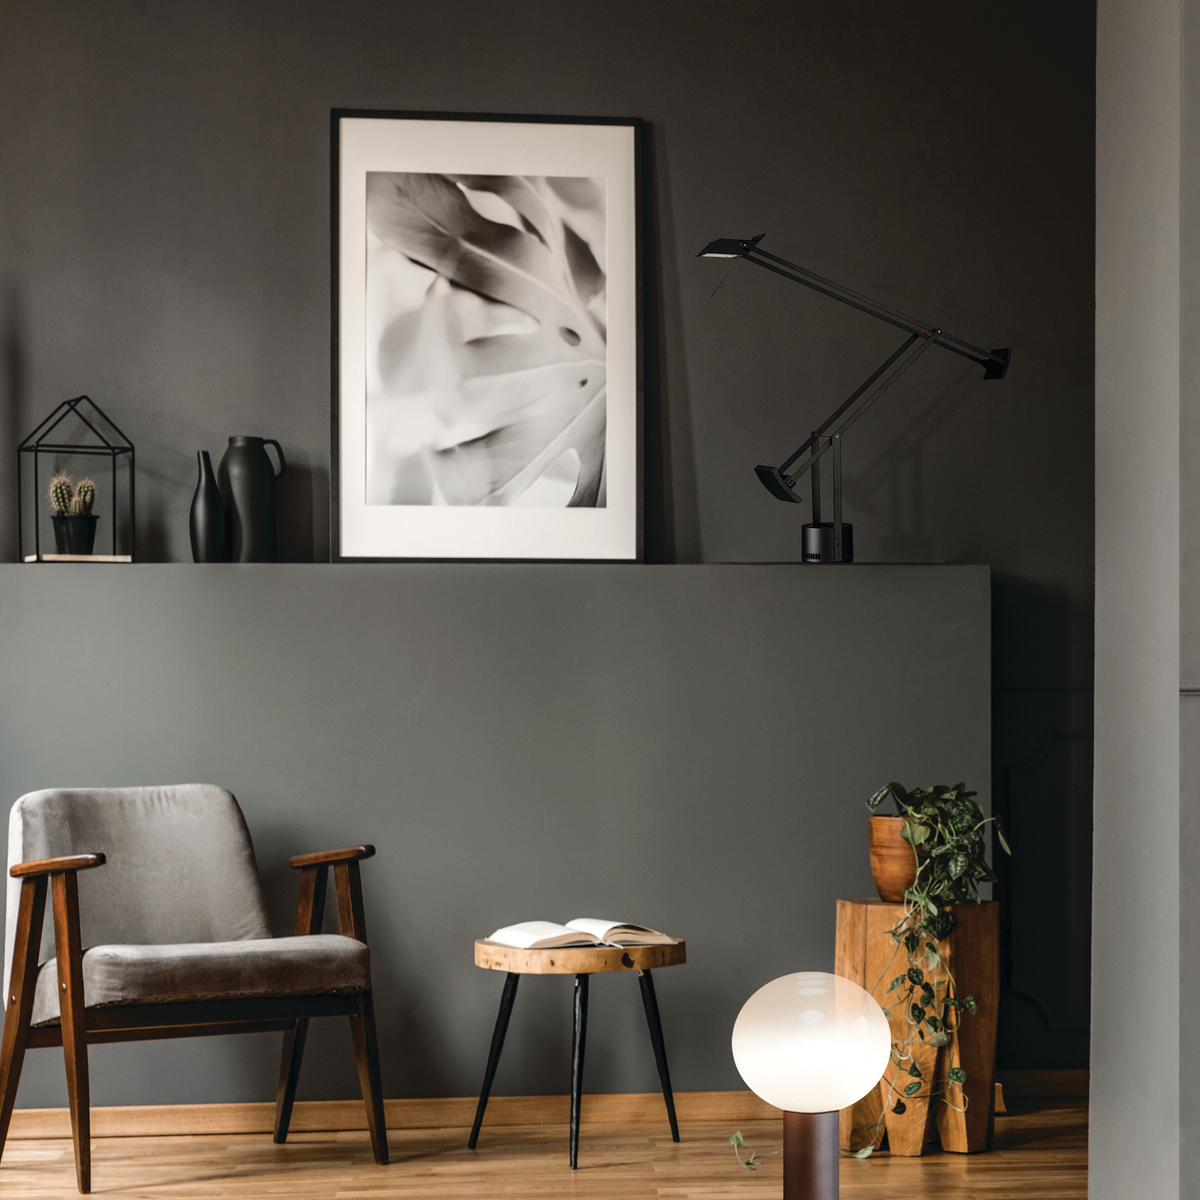 Black task lamp in gray living room with natural wood accents.